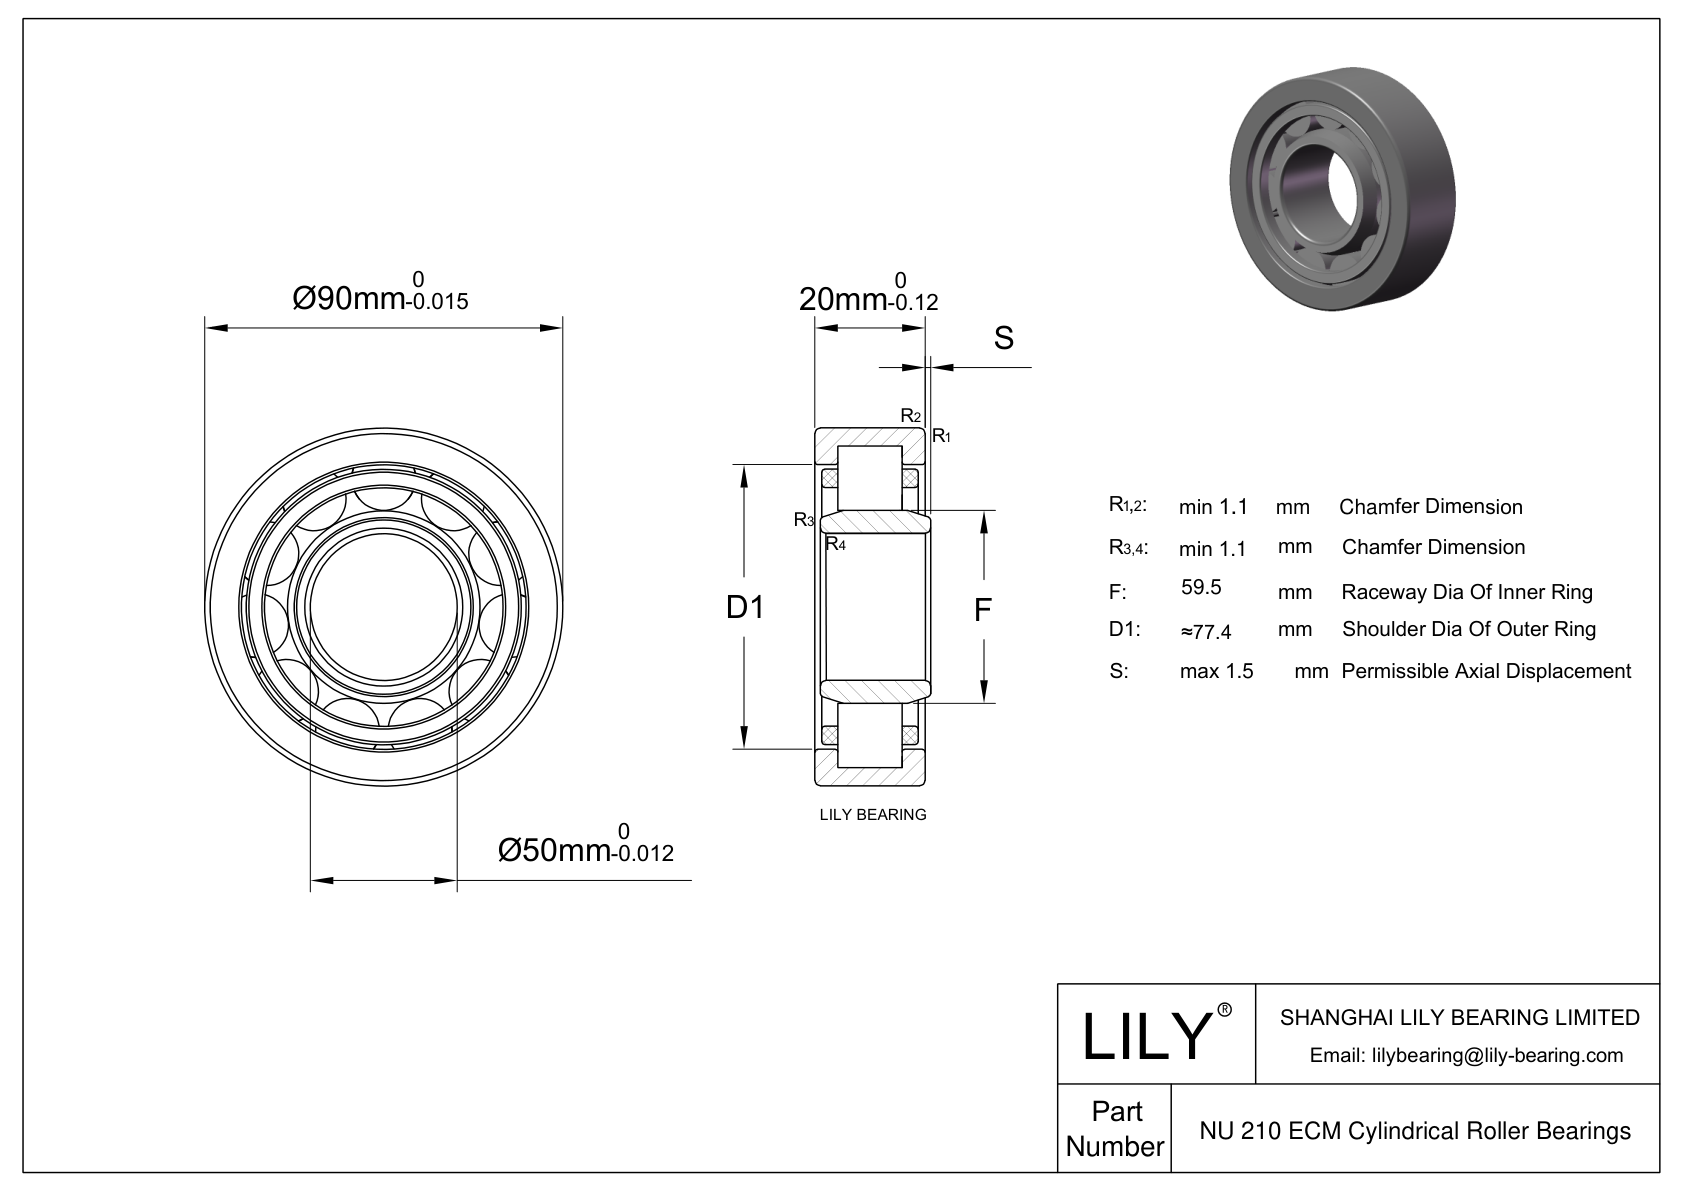 NU 210 ECM/C3VL0241 Ceramic Coated Cylindrical Roller Bearings cad drawing